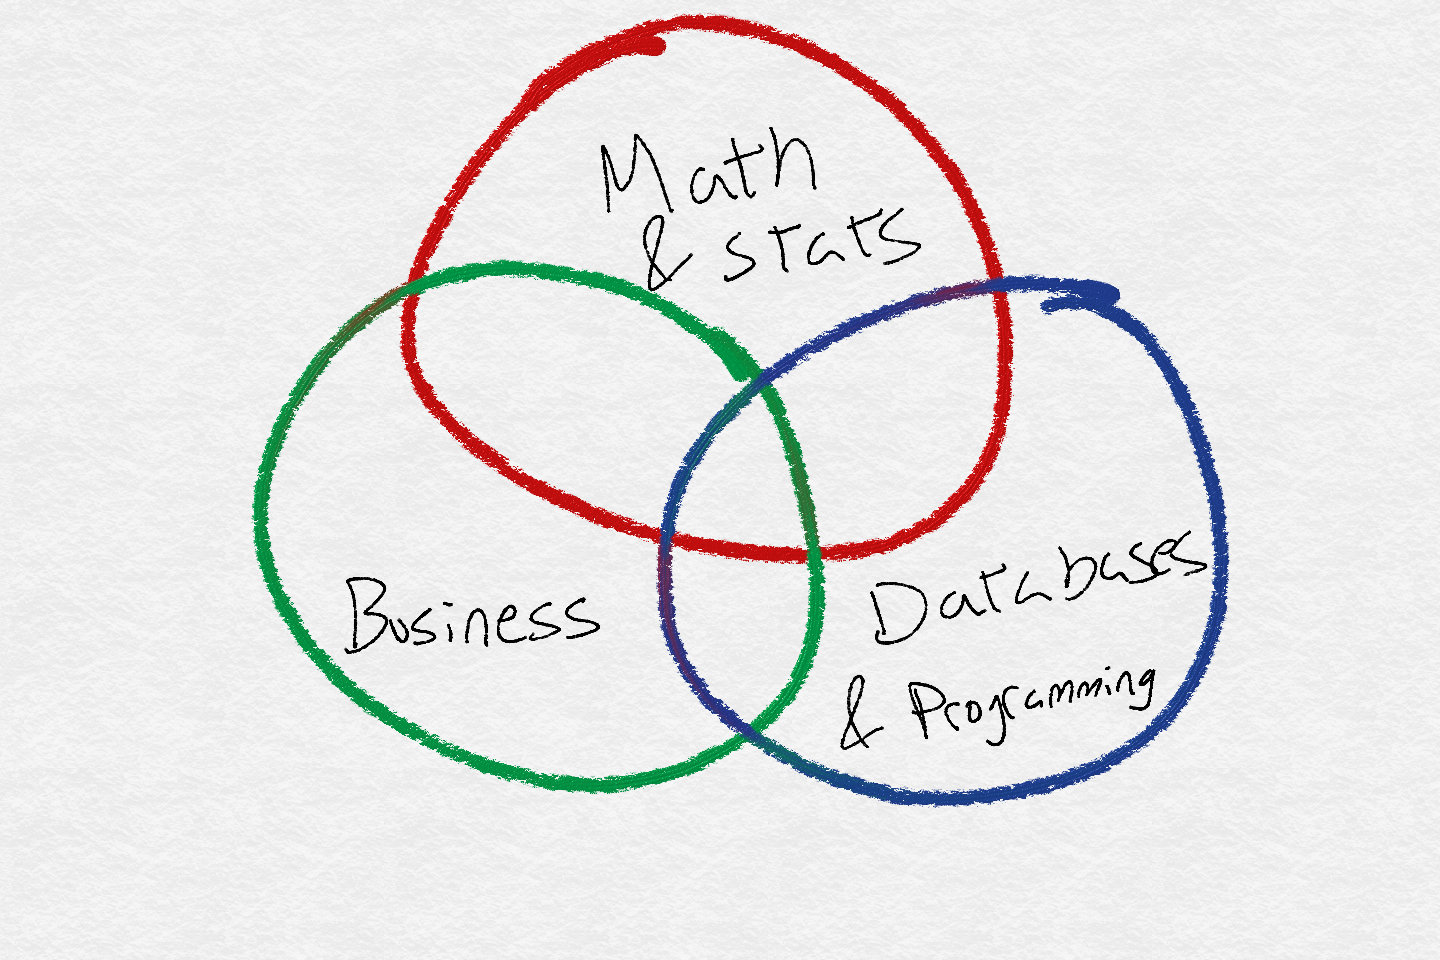 Everything I want in a good data scientist in three easy circles.